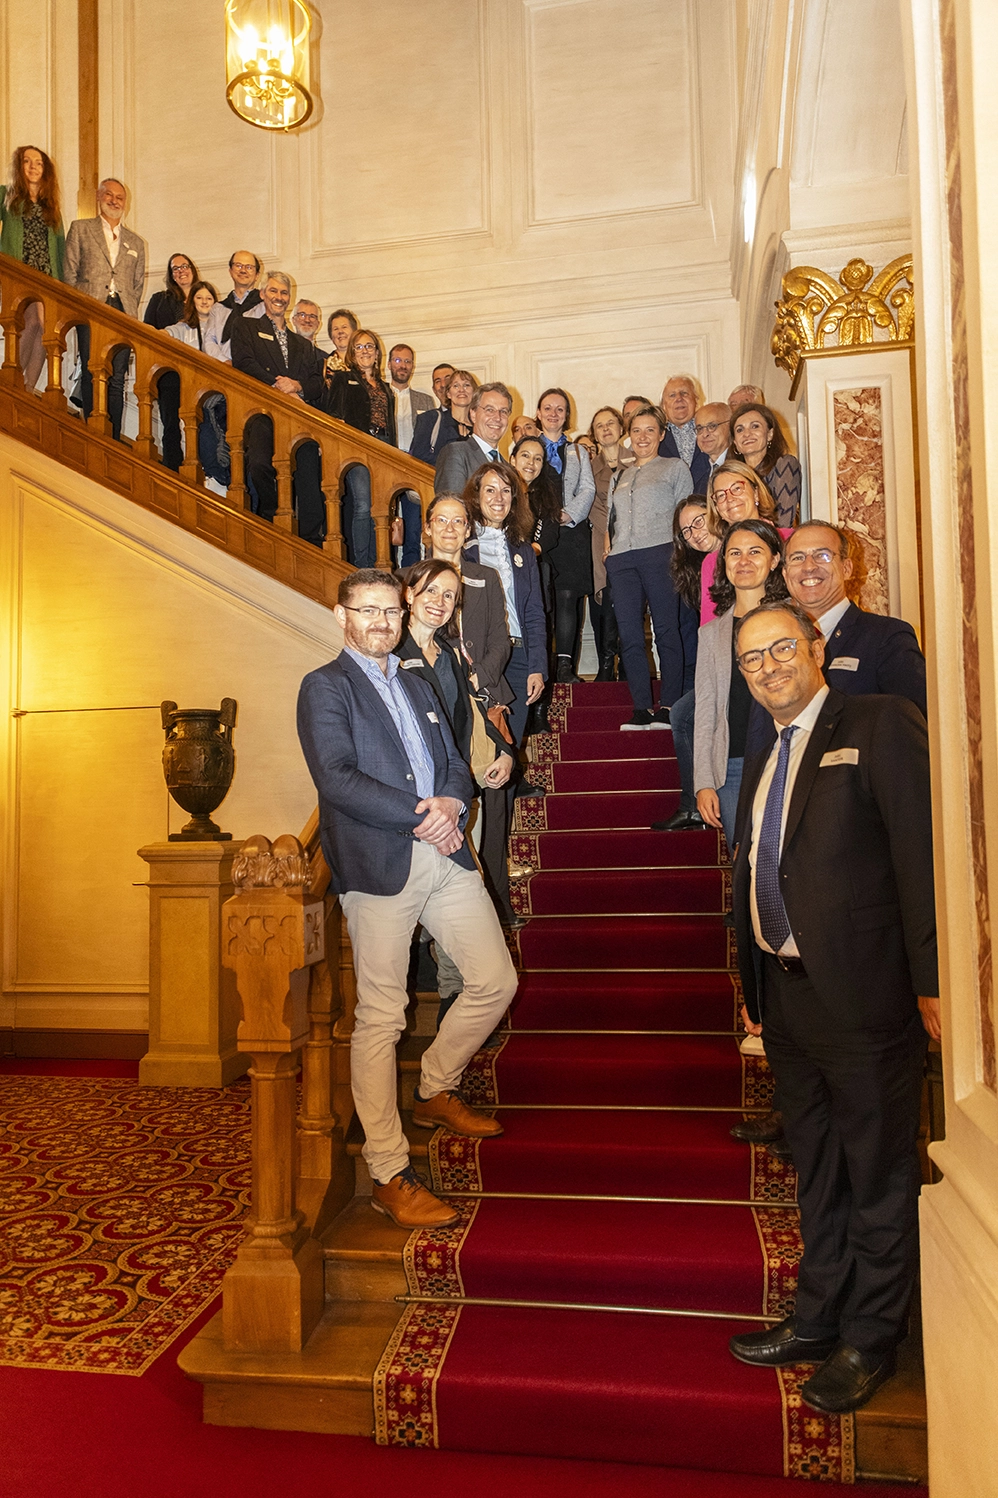 Visit of the Chambre des Députés of the Grand Duchy of Luxembourg